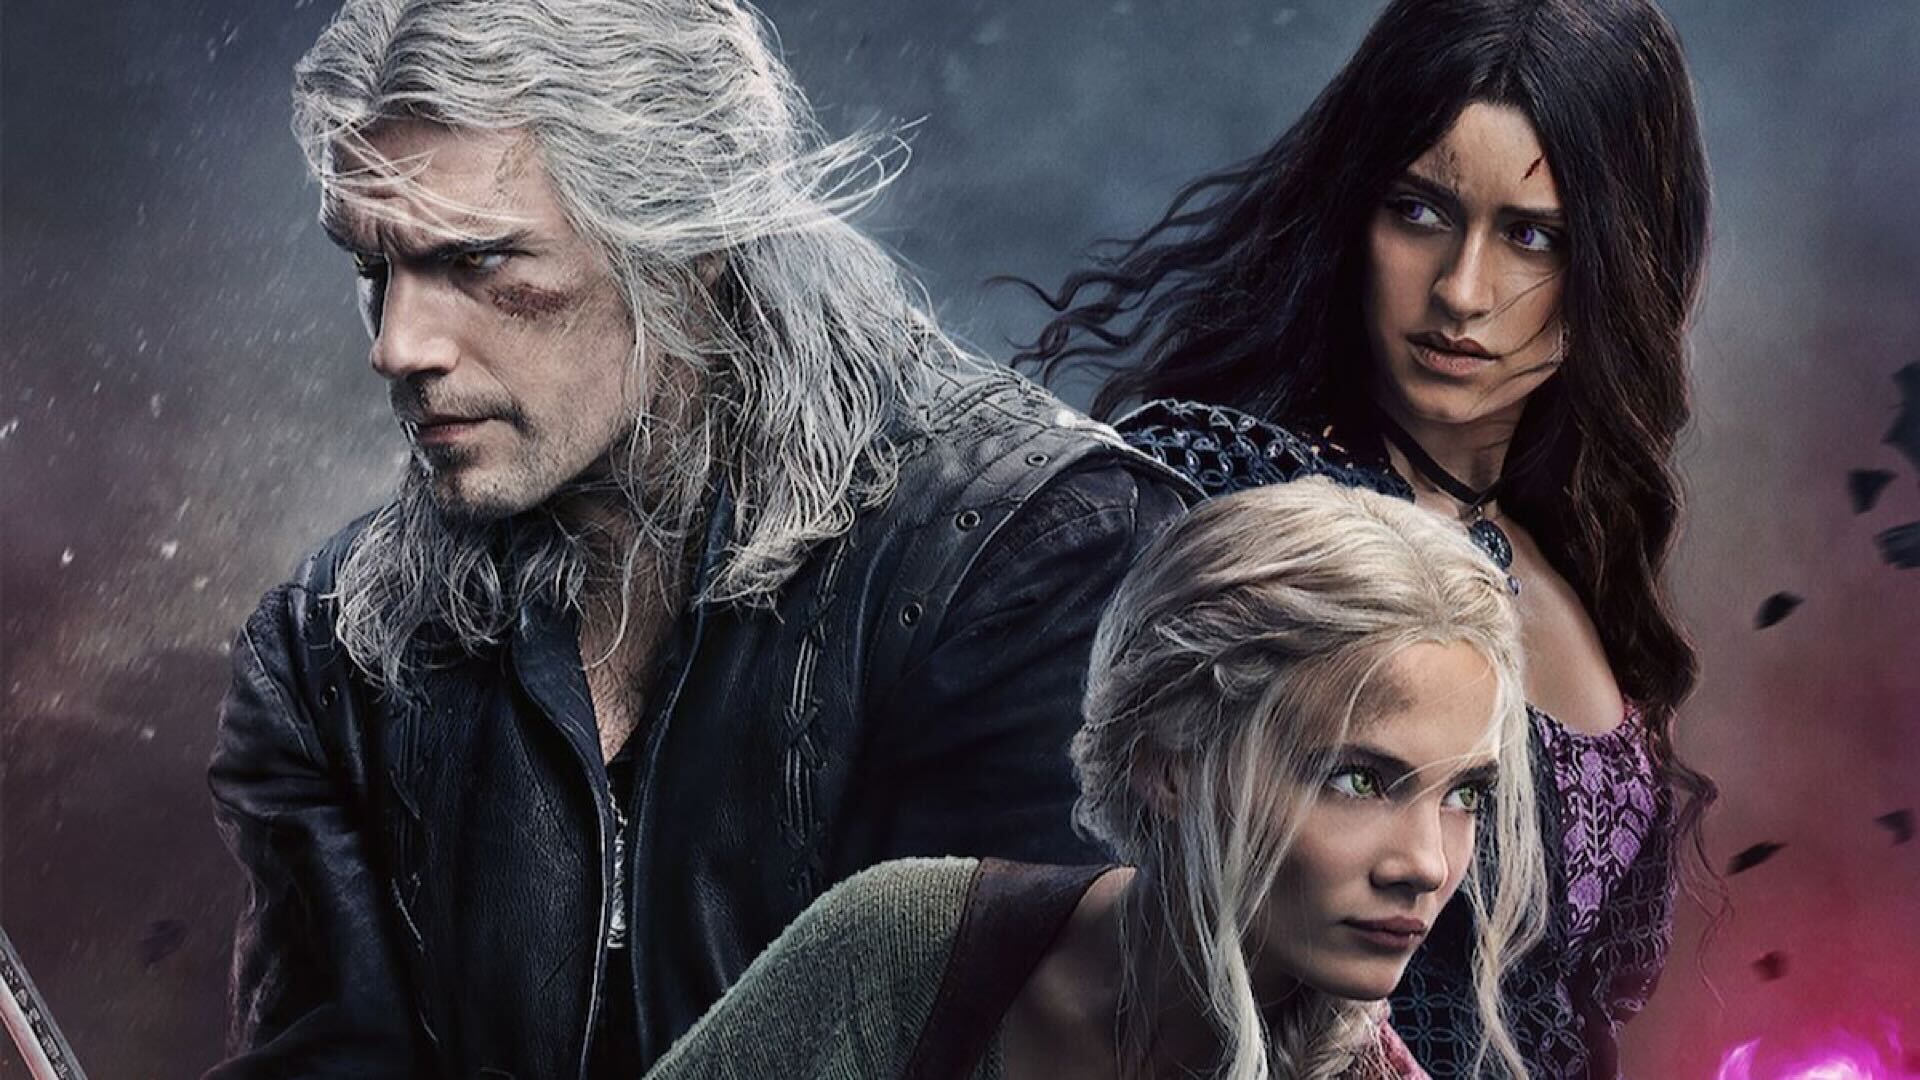 The Witcher Season 4 Will Feature A Special Episode Titled ‘The Rats: A Witcher Tale’